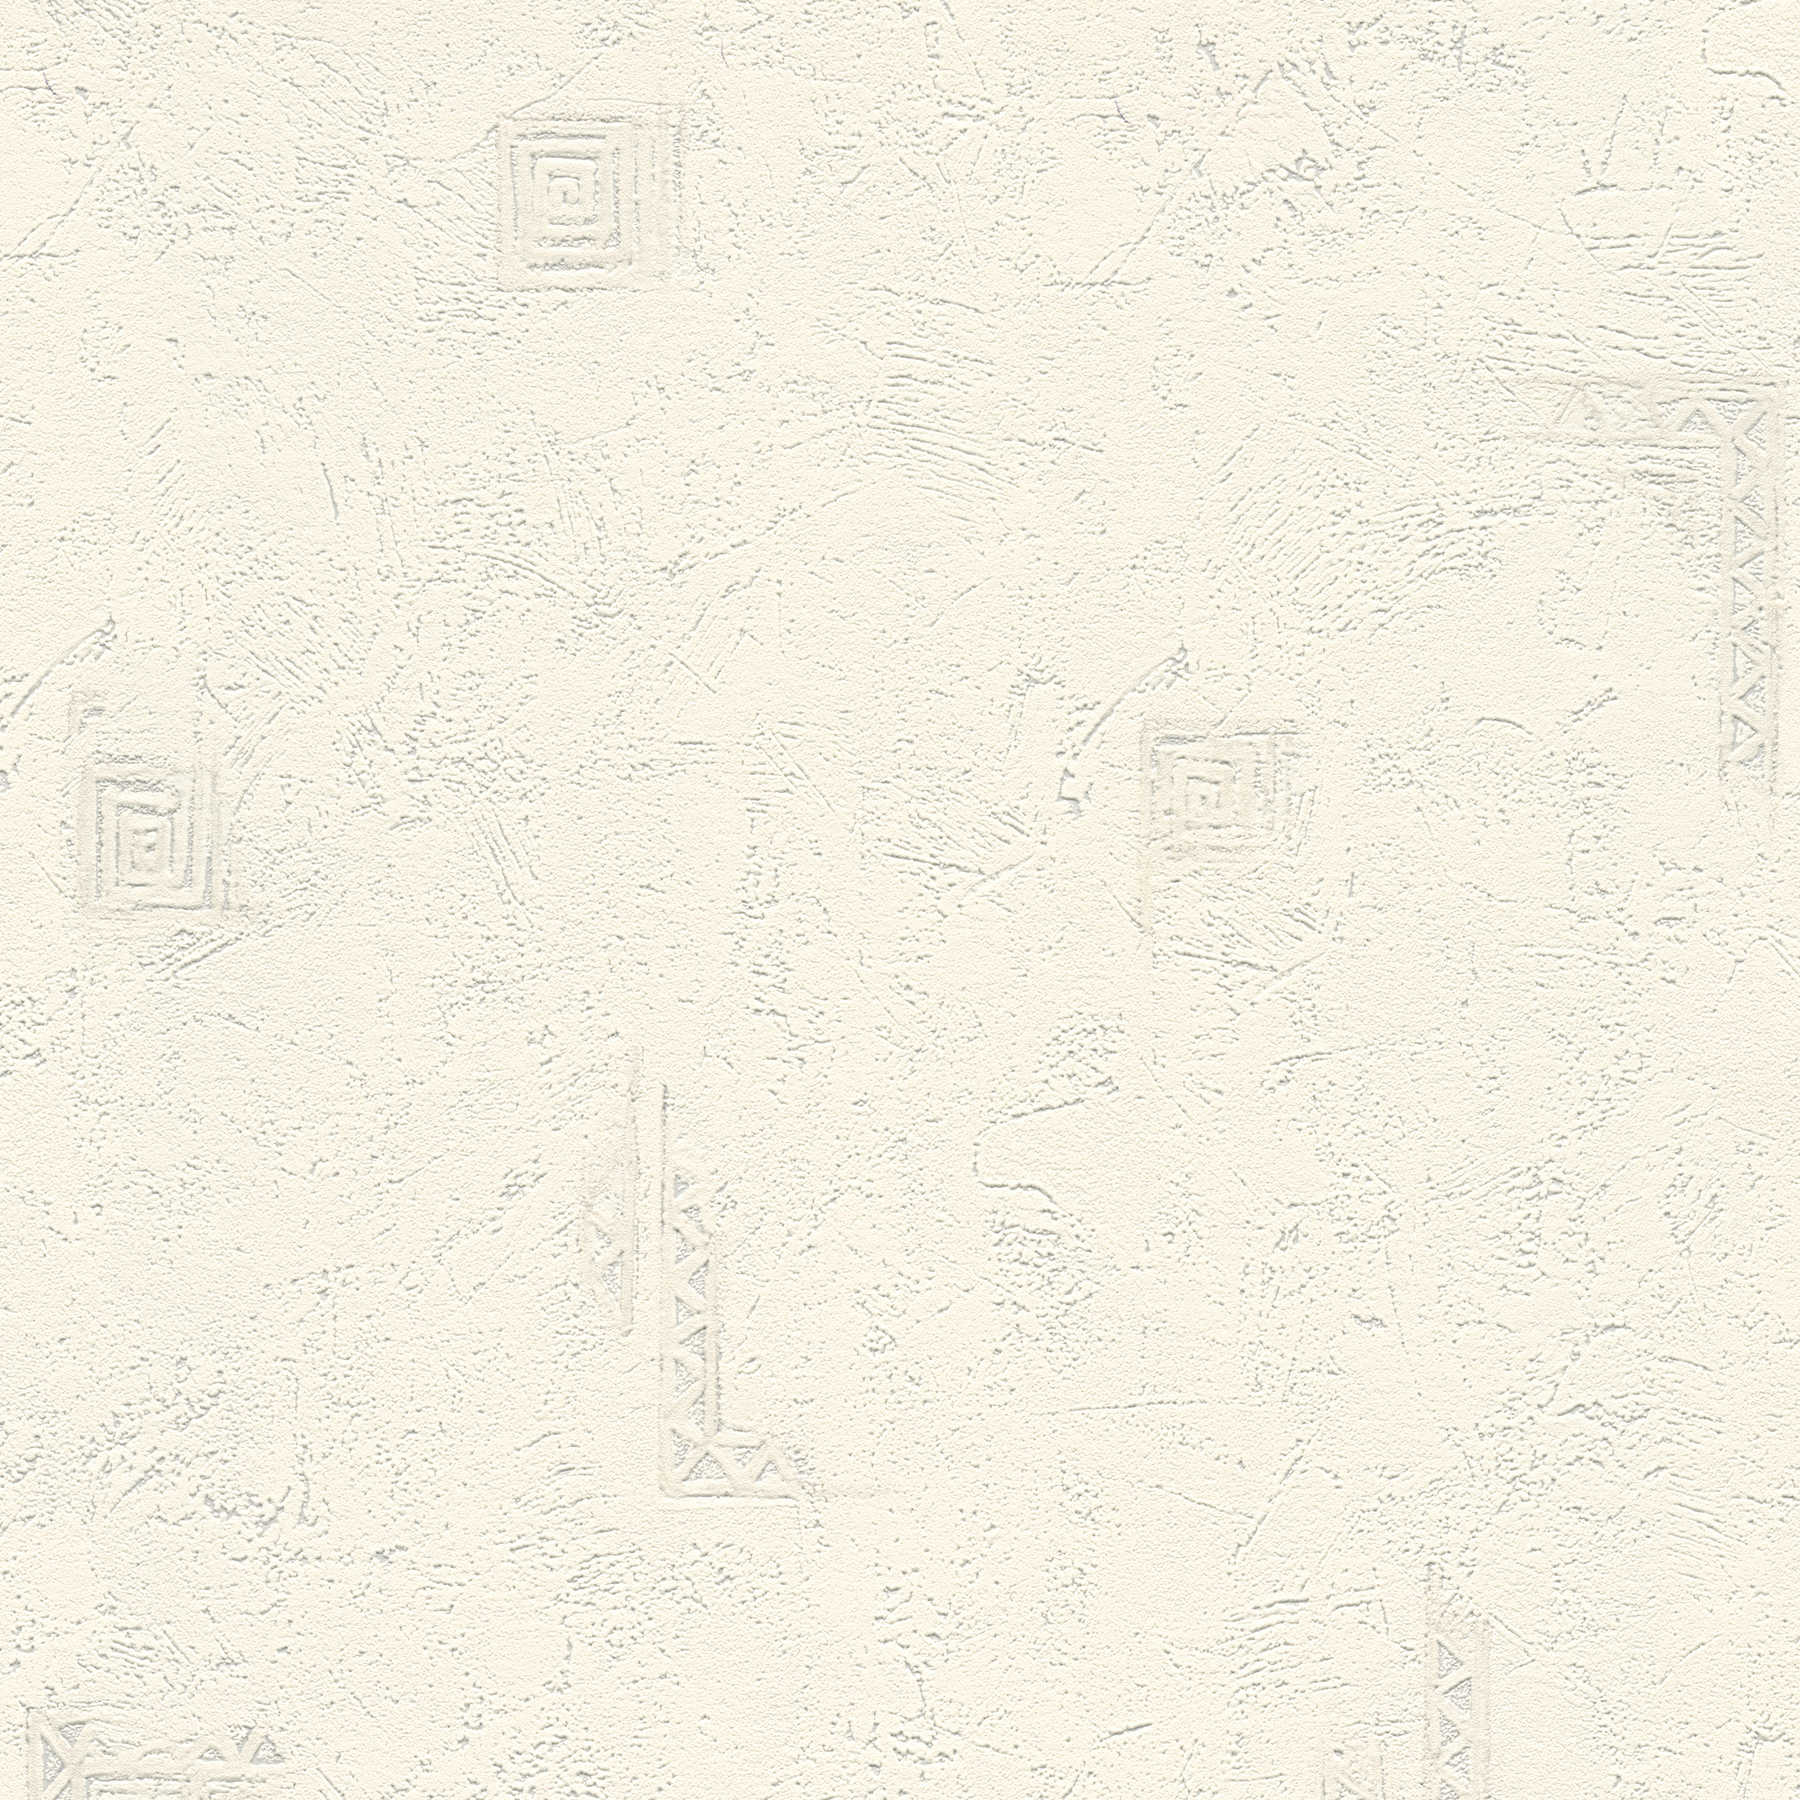 Wallpaper with plaster texture and graphic elements - grey, white
